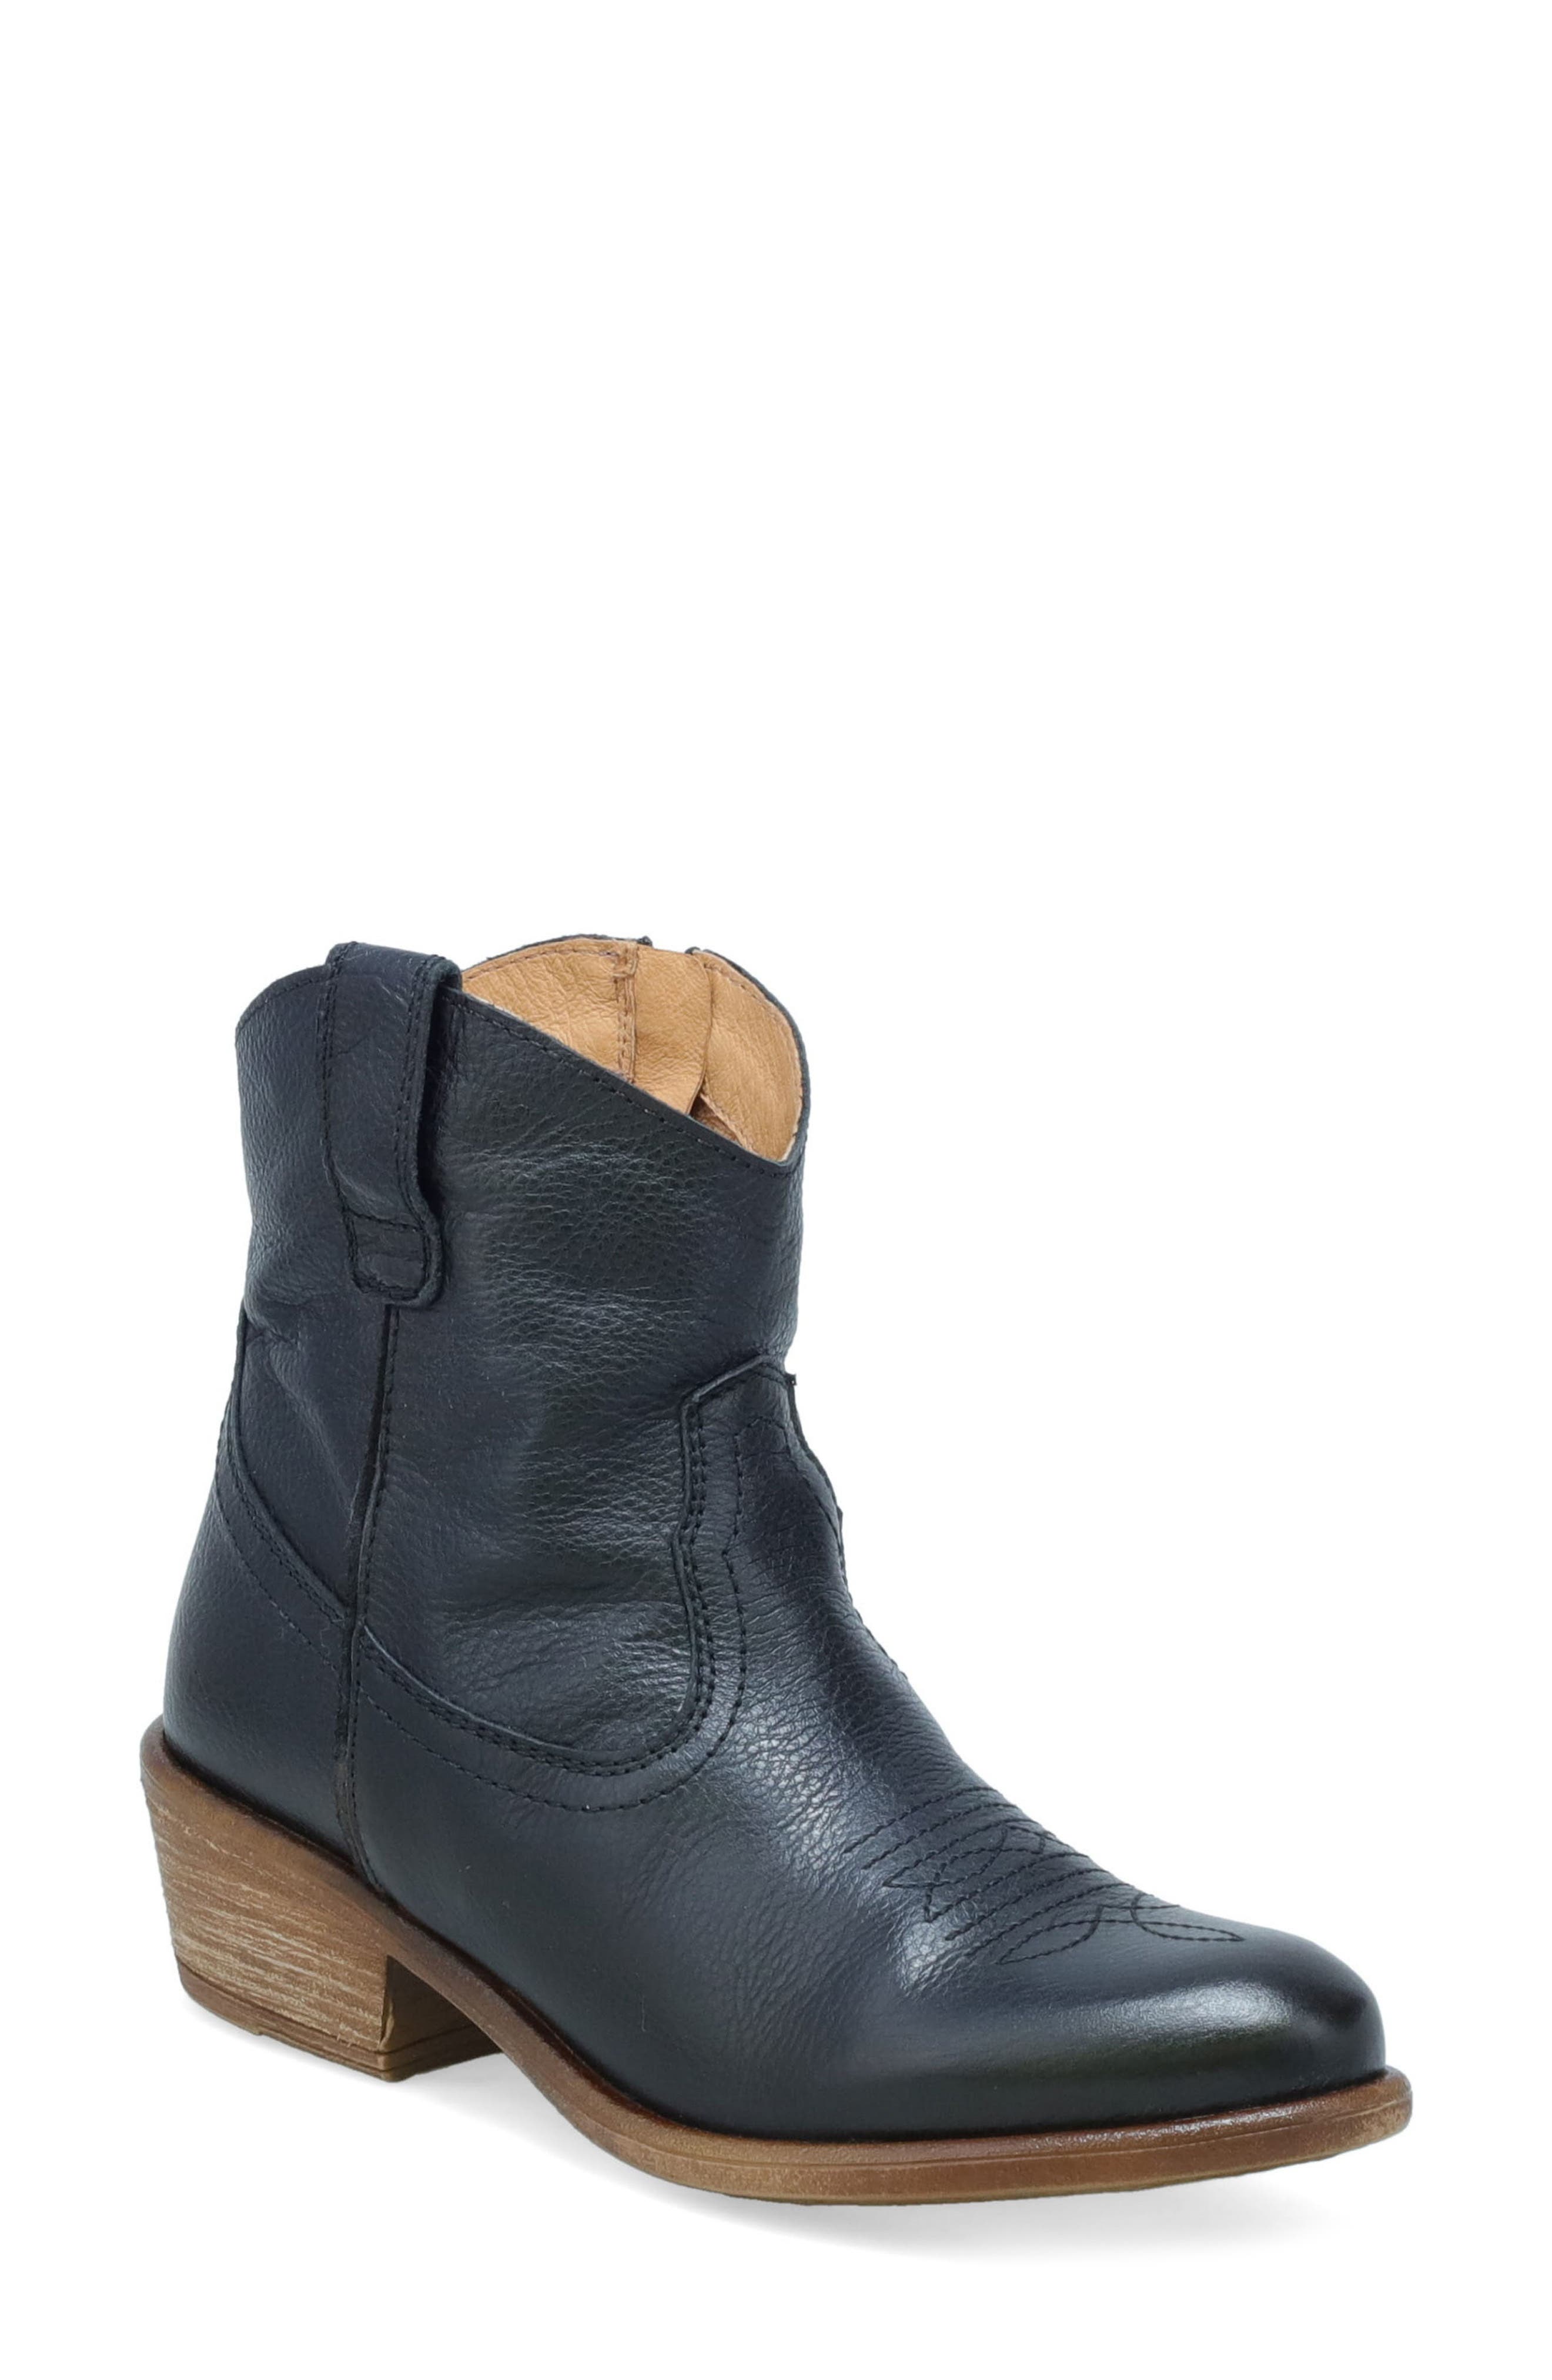 Givenchy Black Western Leather Ankle Boots